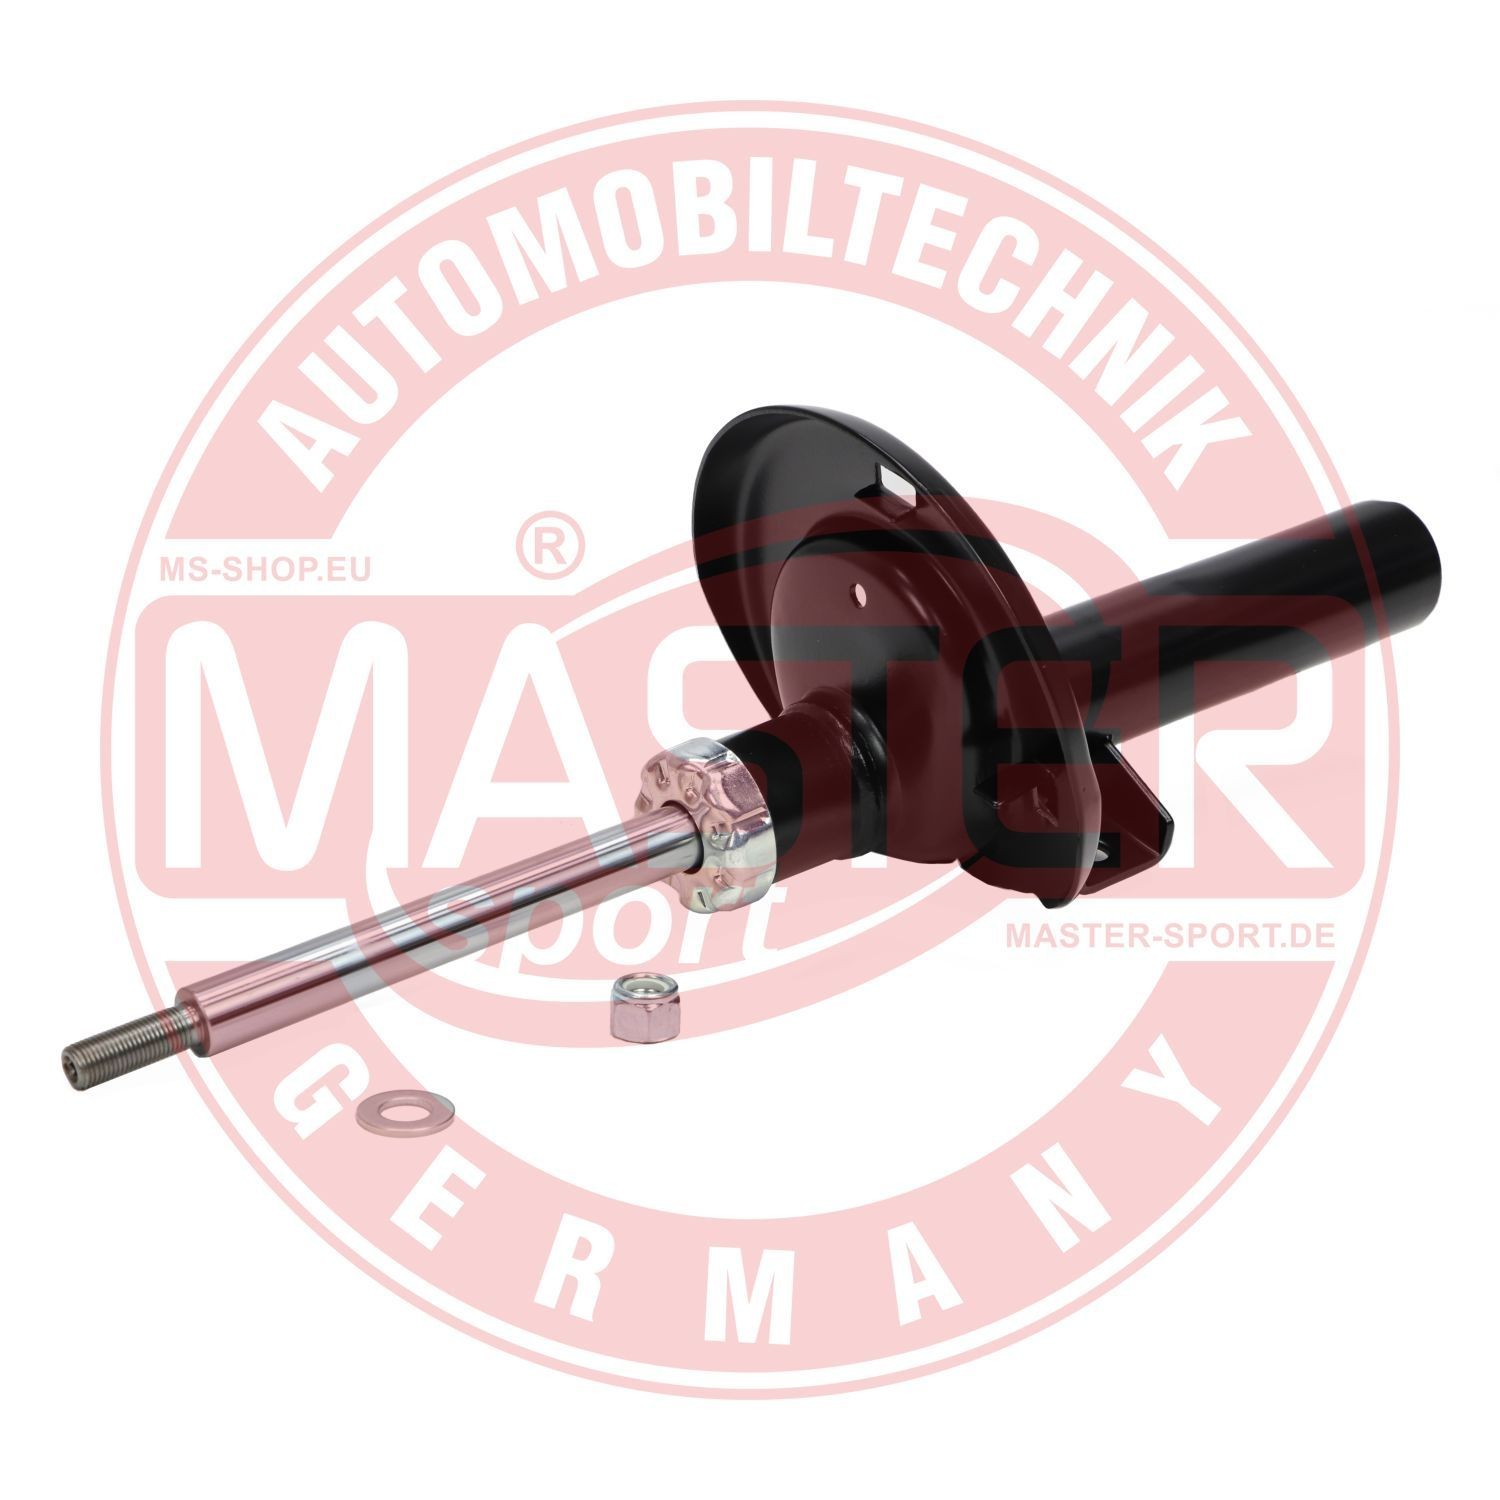 Shock absorber 200419-PCS-MS from MASTER-SPORT